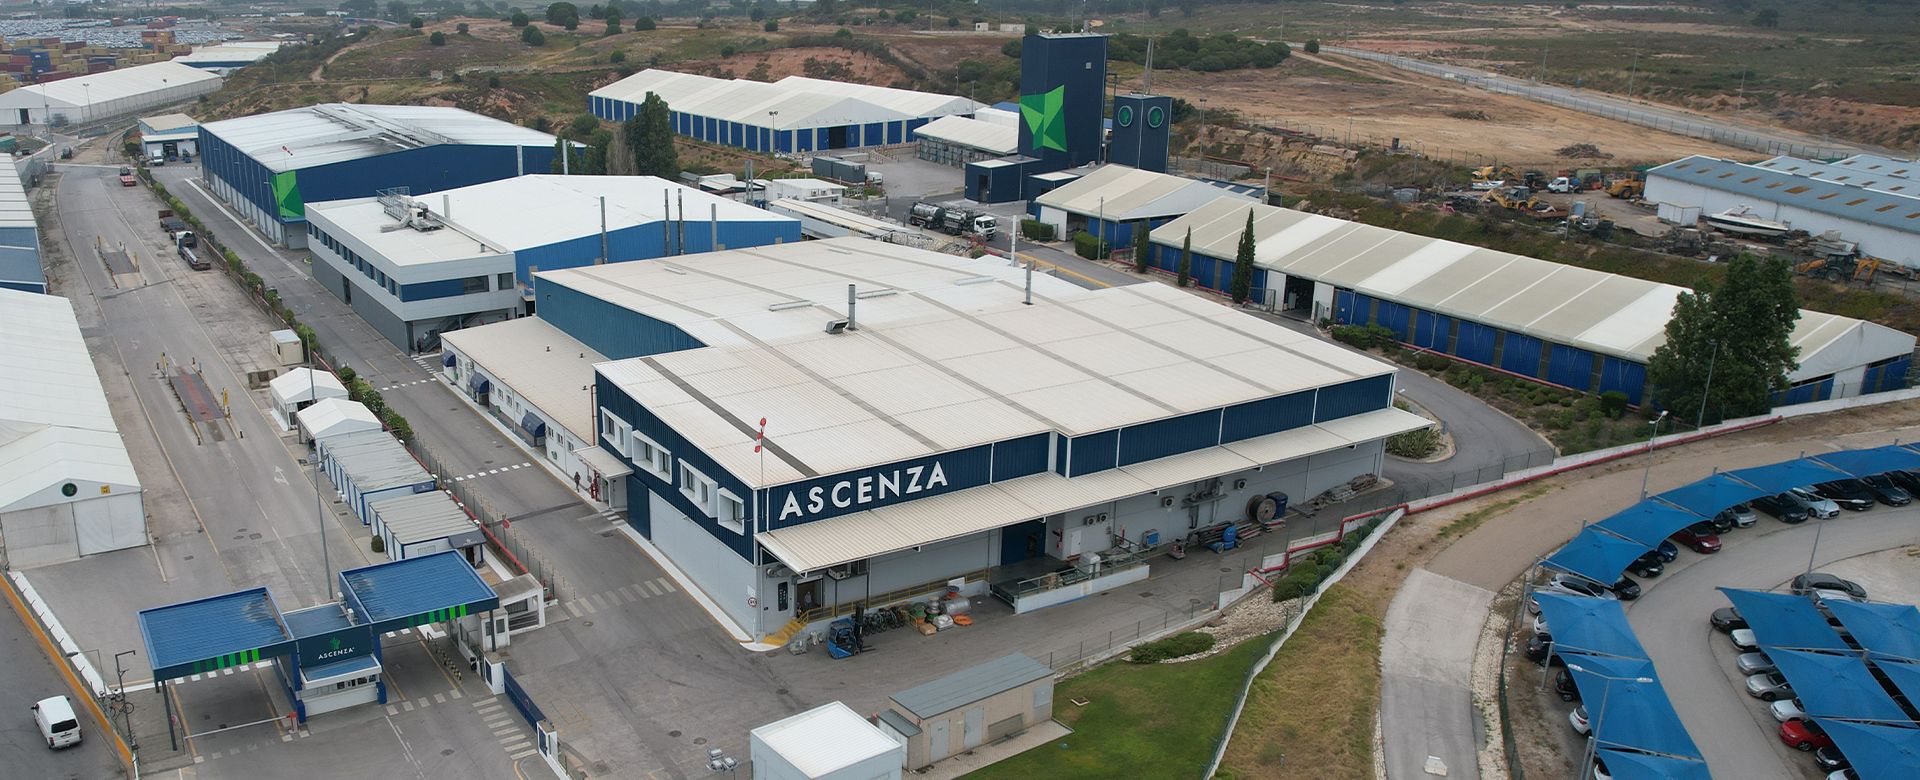 ASCENZA on the path of innovation and sustainability